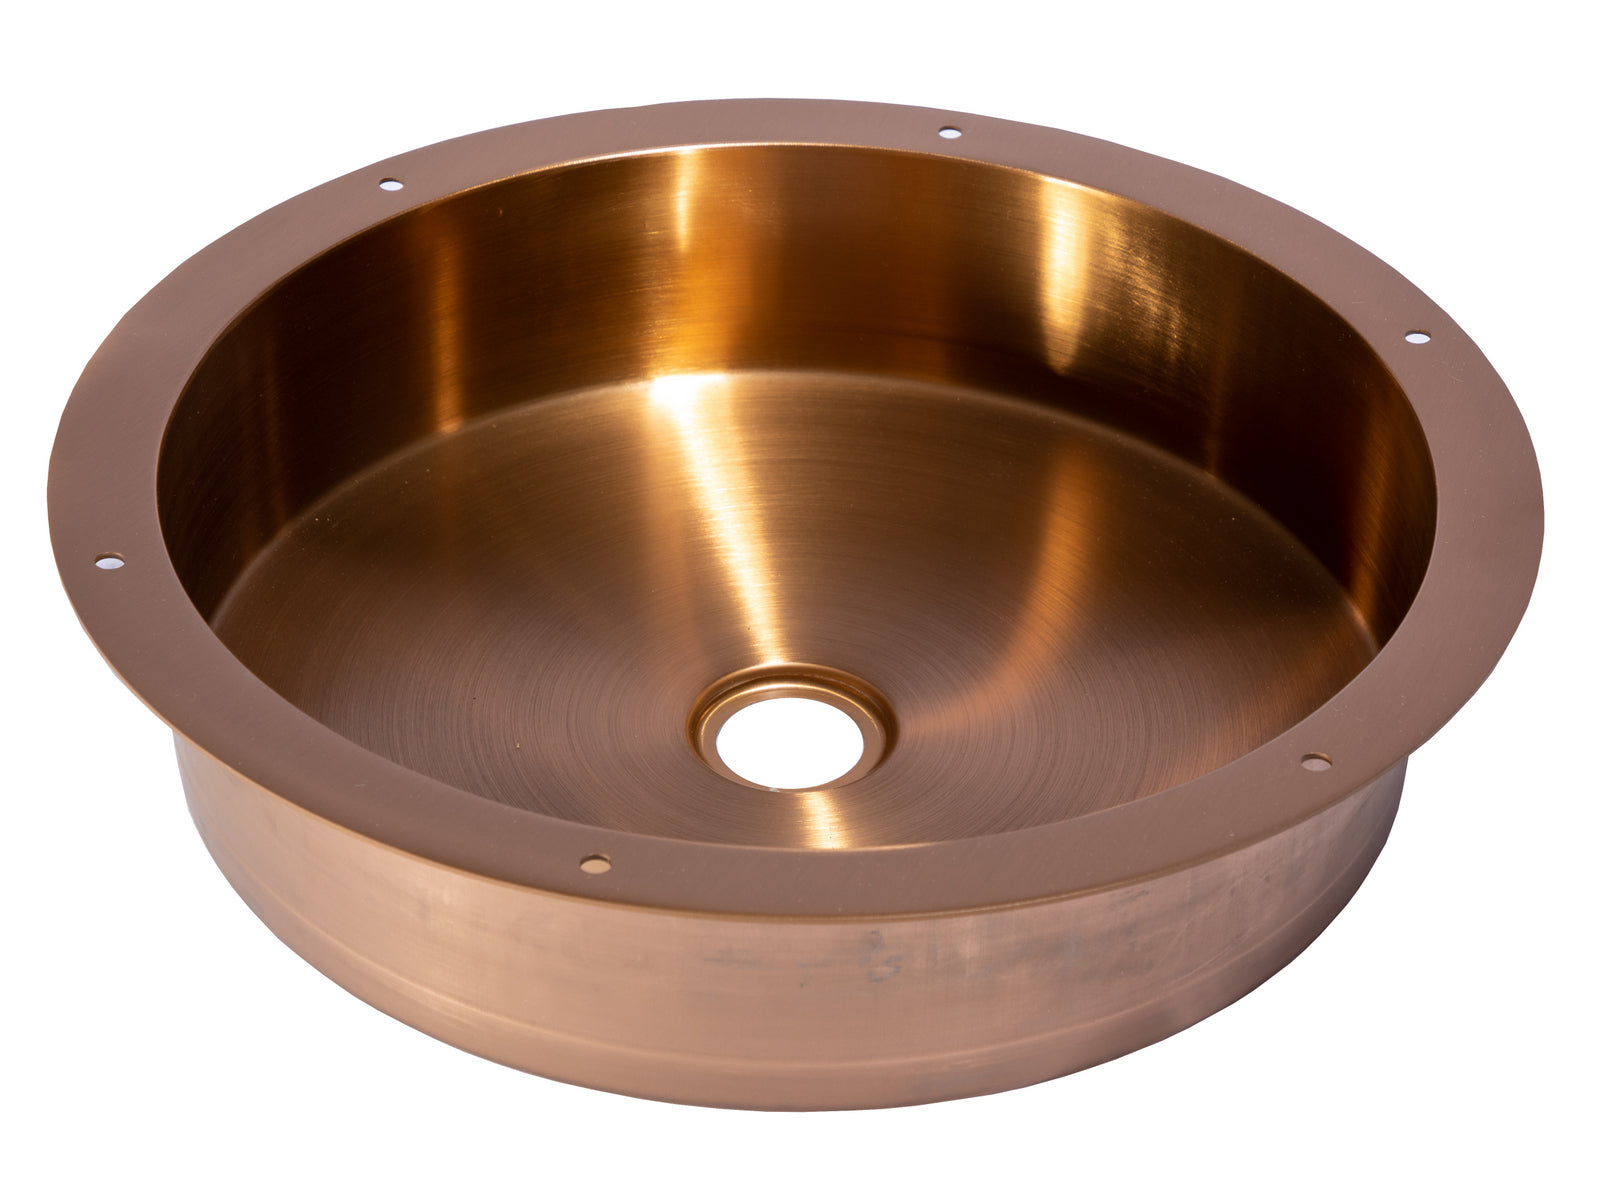 15" Round Stainless Steel Undermount Bathroom Sink with Drain in Rose Gold